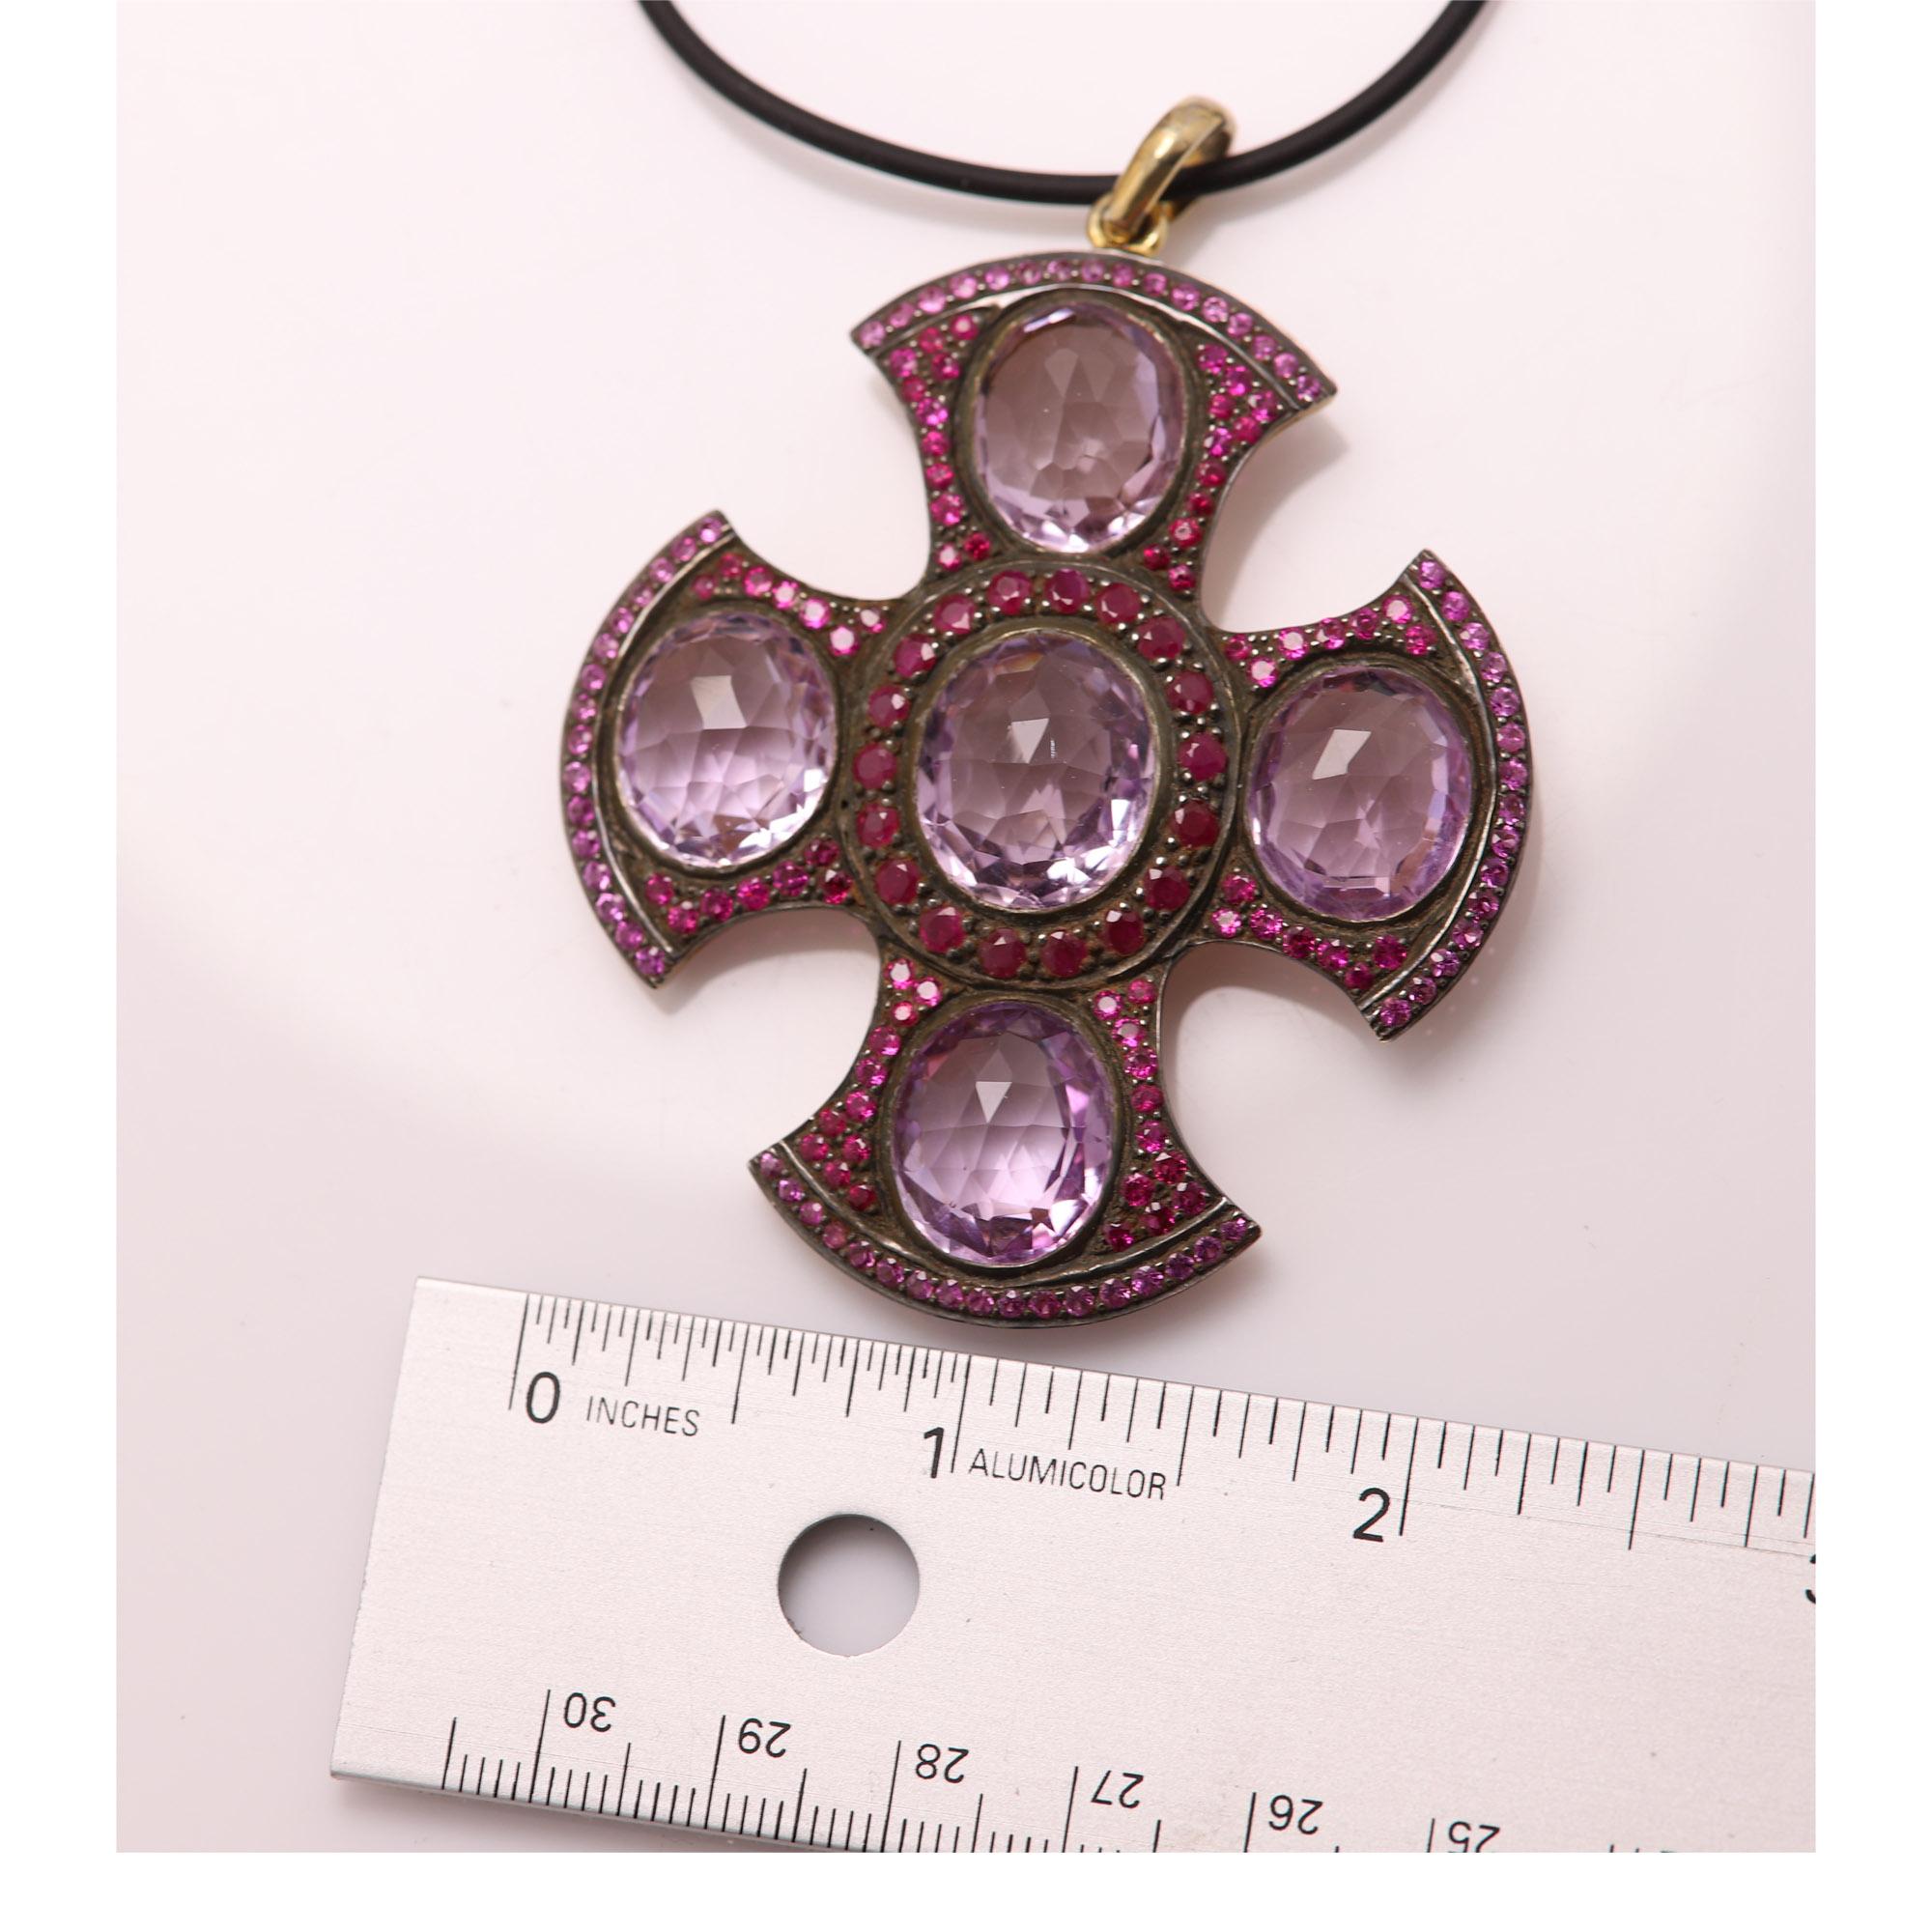 Unique Vintage Sterling Silver 925 & 18k Gold in black rhodium Cross
Hand made in India.
Approx 2' x 2' Inch 
Sterling Silver 925 plated black rhodium 
Natural Oval shape light amethyst
Natural Ruby Gemstones all around
Back area and bail is plated